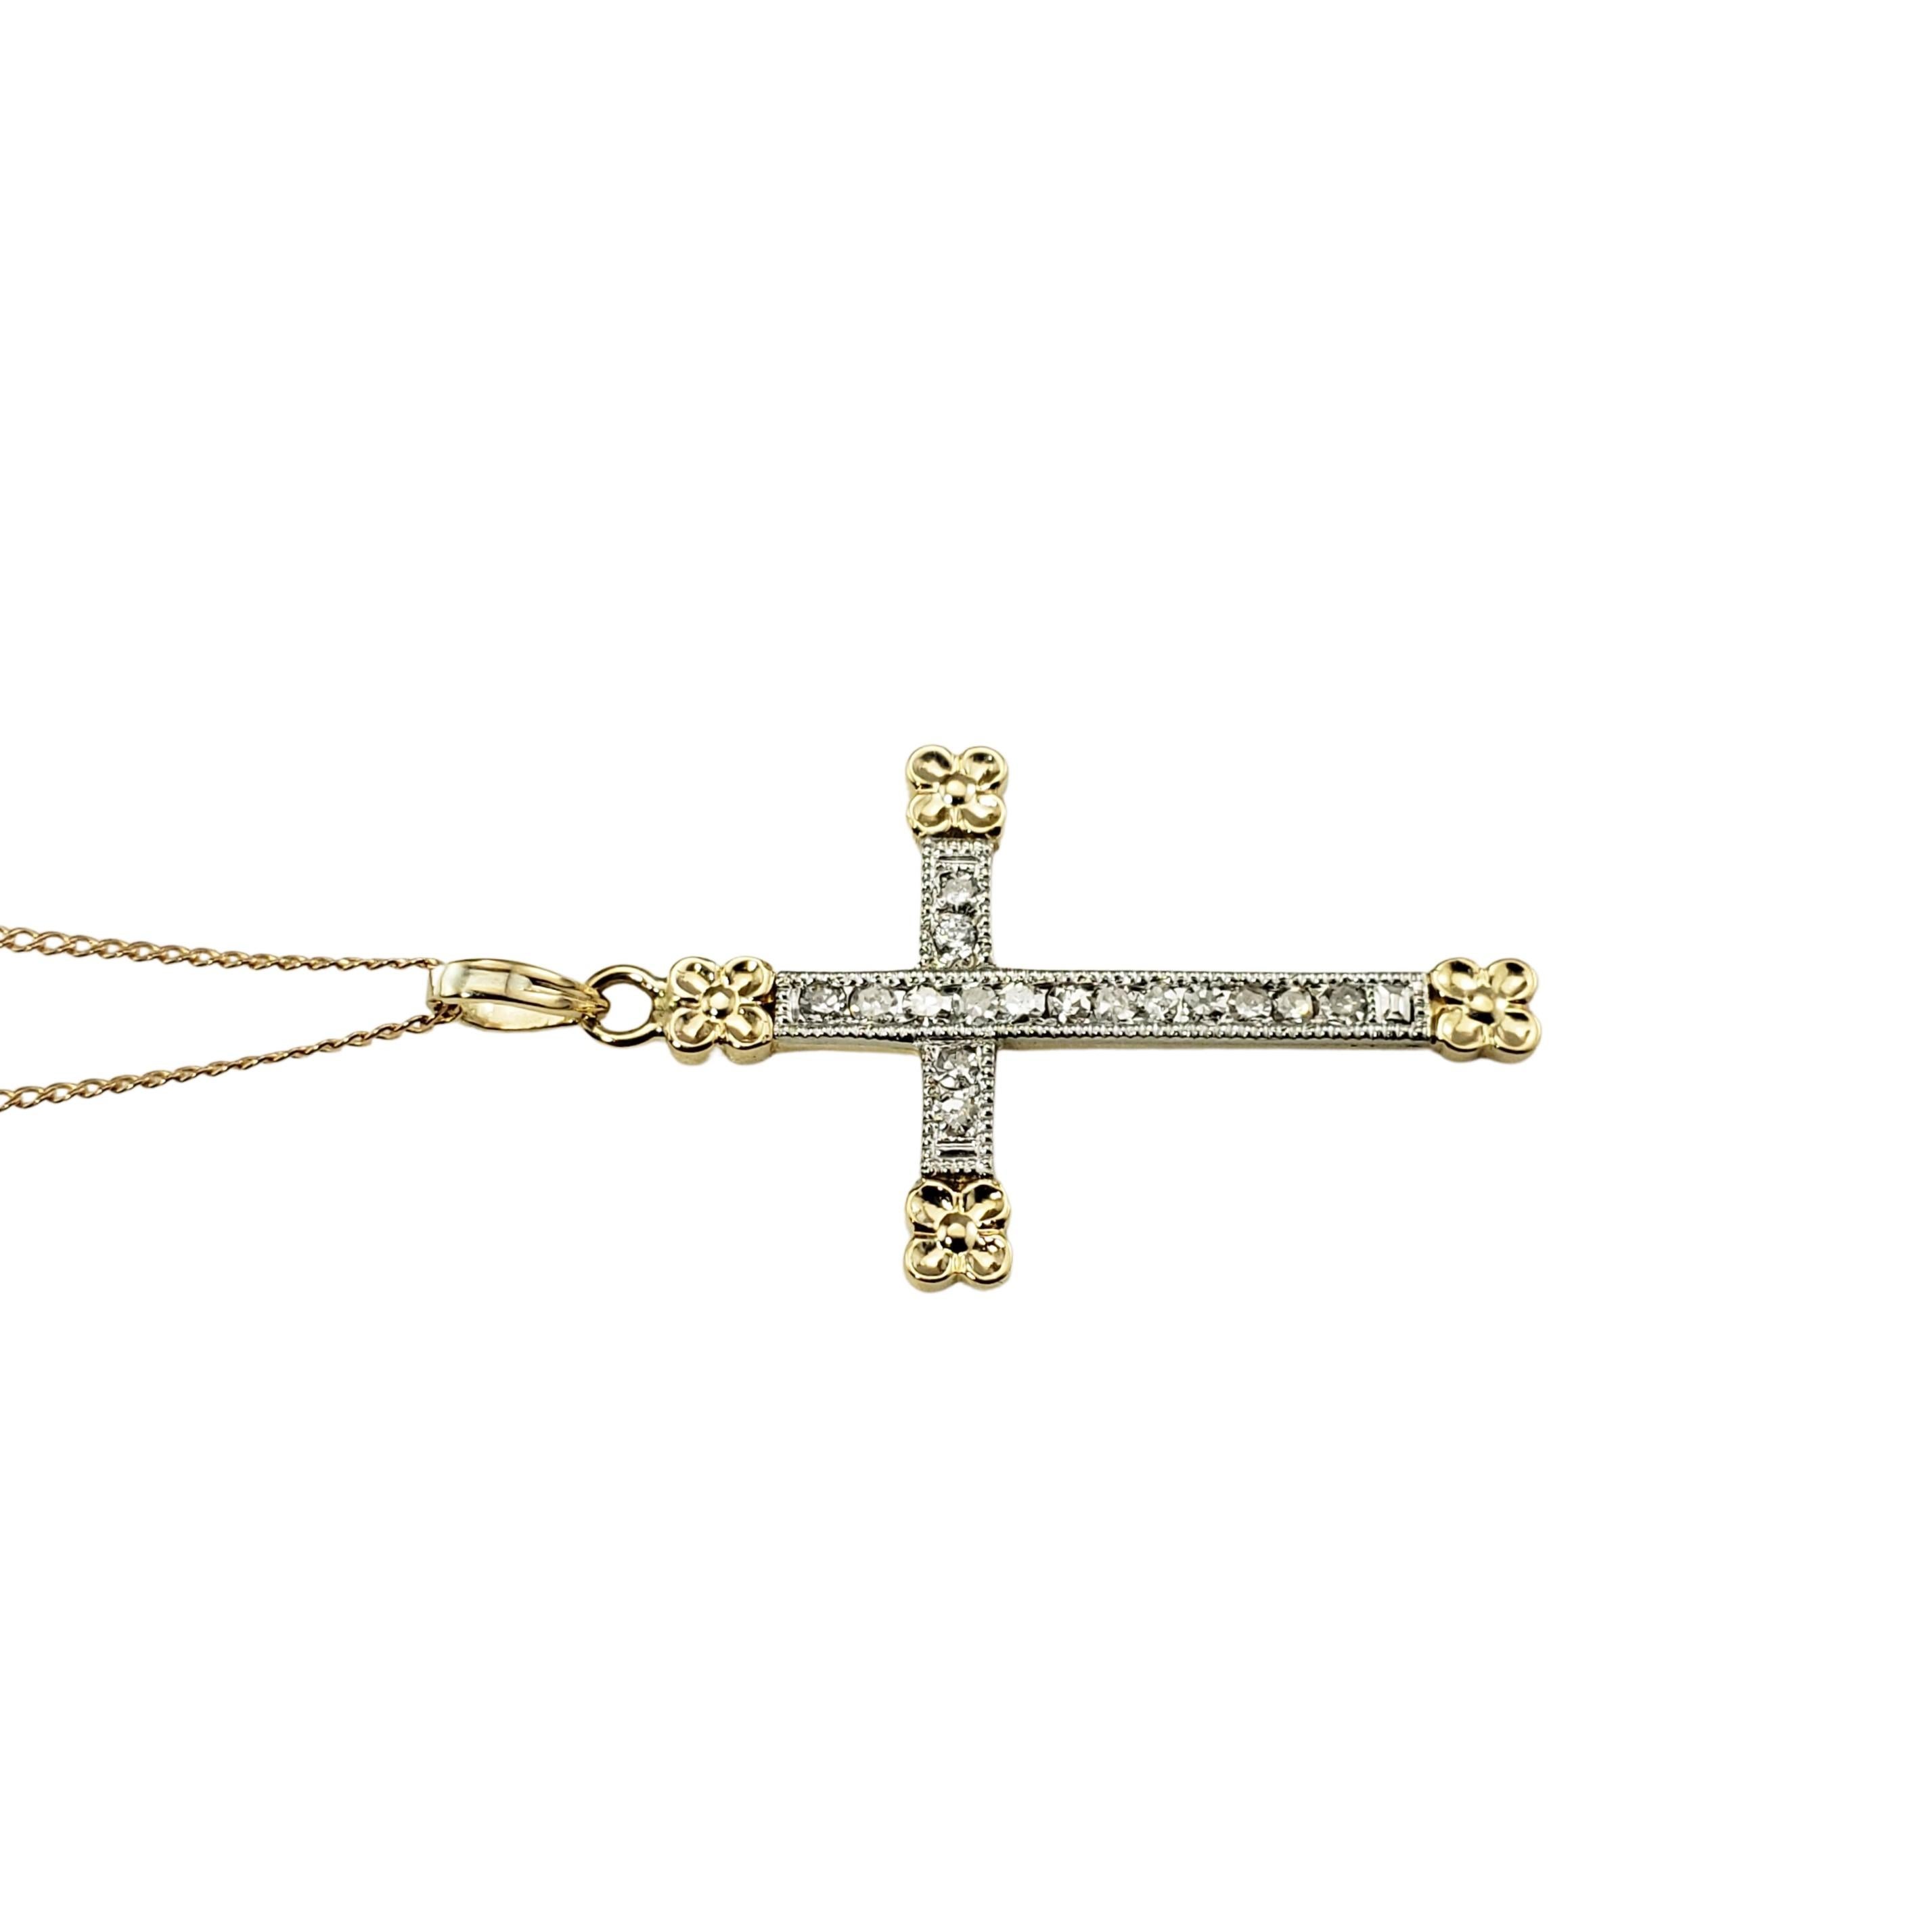 14 Karat Yellow/White Gold and Diamond Cross Pendant Necklace-

This sparkling cross pendant features 18 round single cut diamonds set in beautifully detailed 14K yellow and white gold.  Suspends from a classic cable necklace.

Approximate total